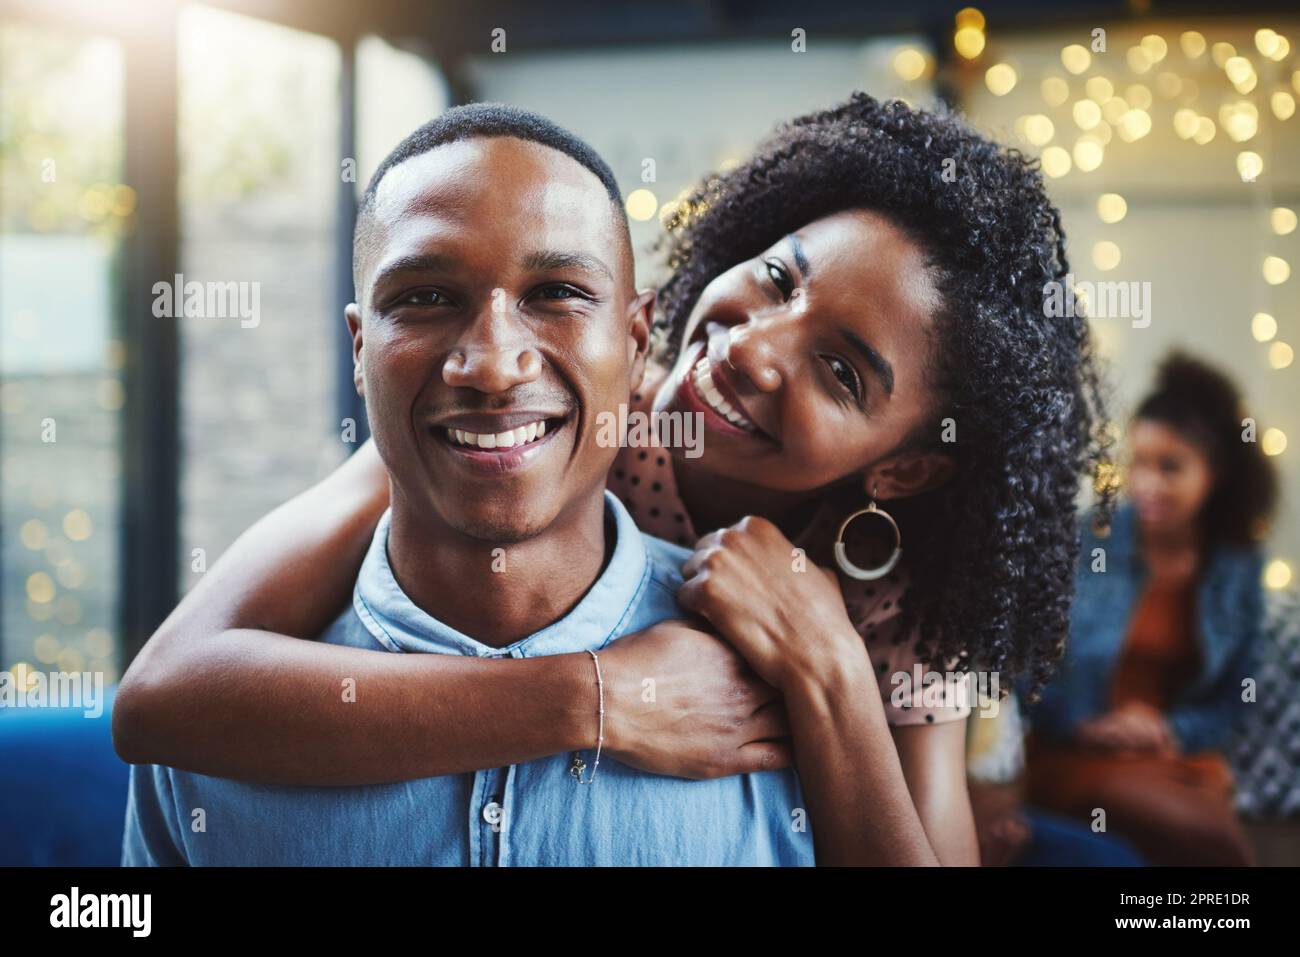 He means the world to me. a happy young couple out on a date. Stock Photo